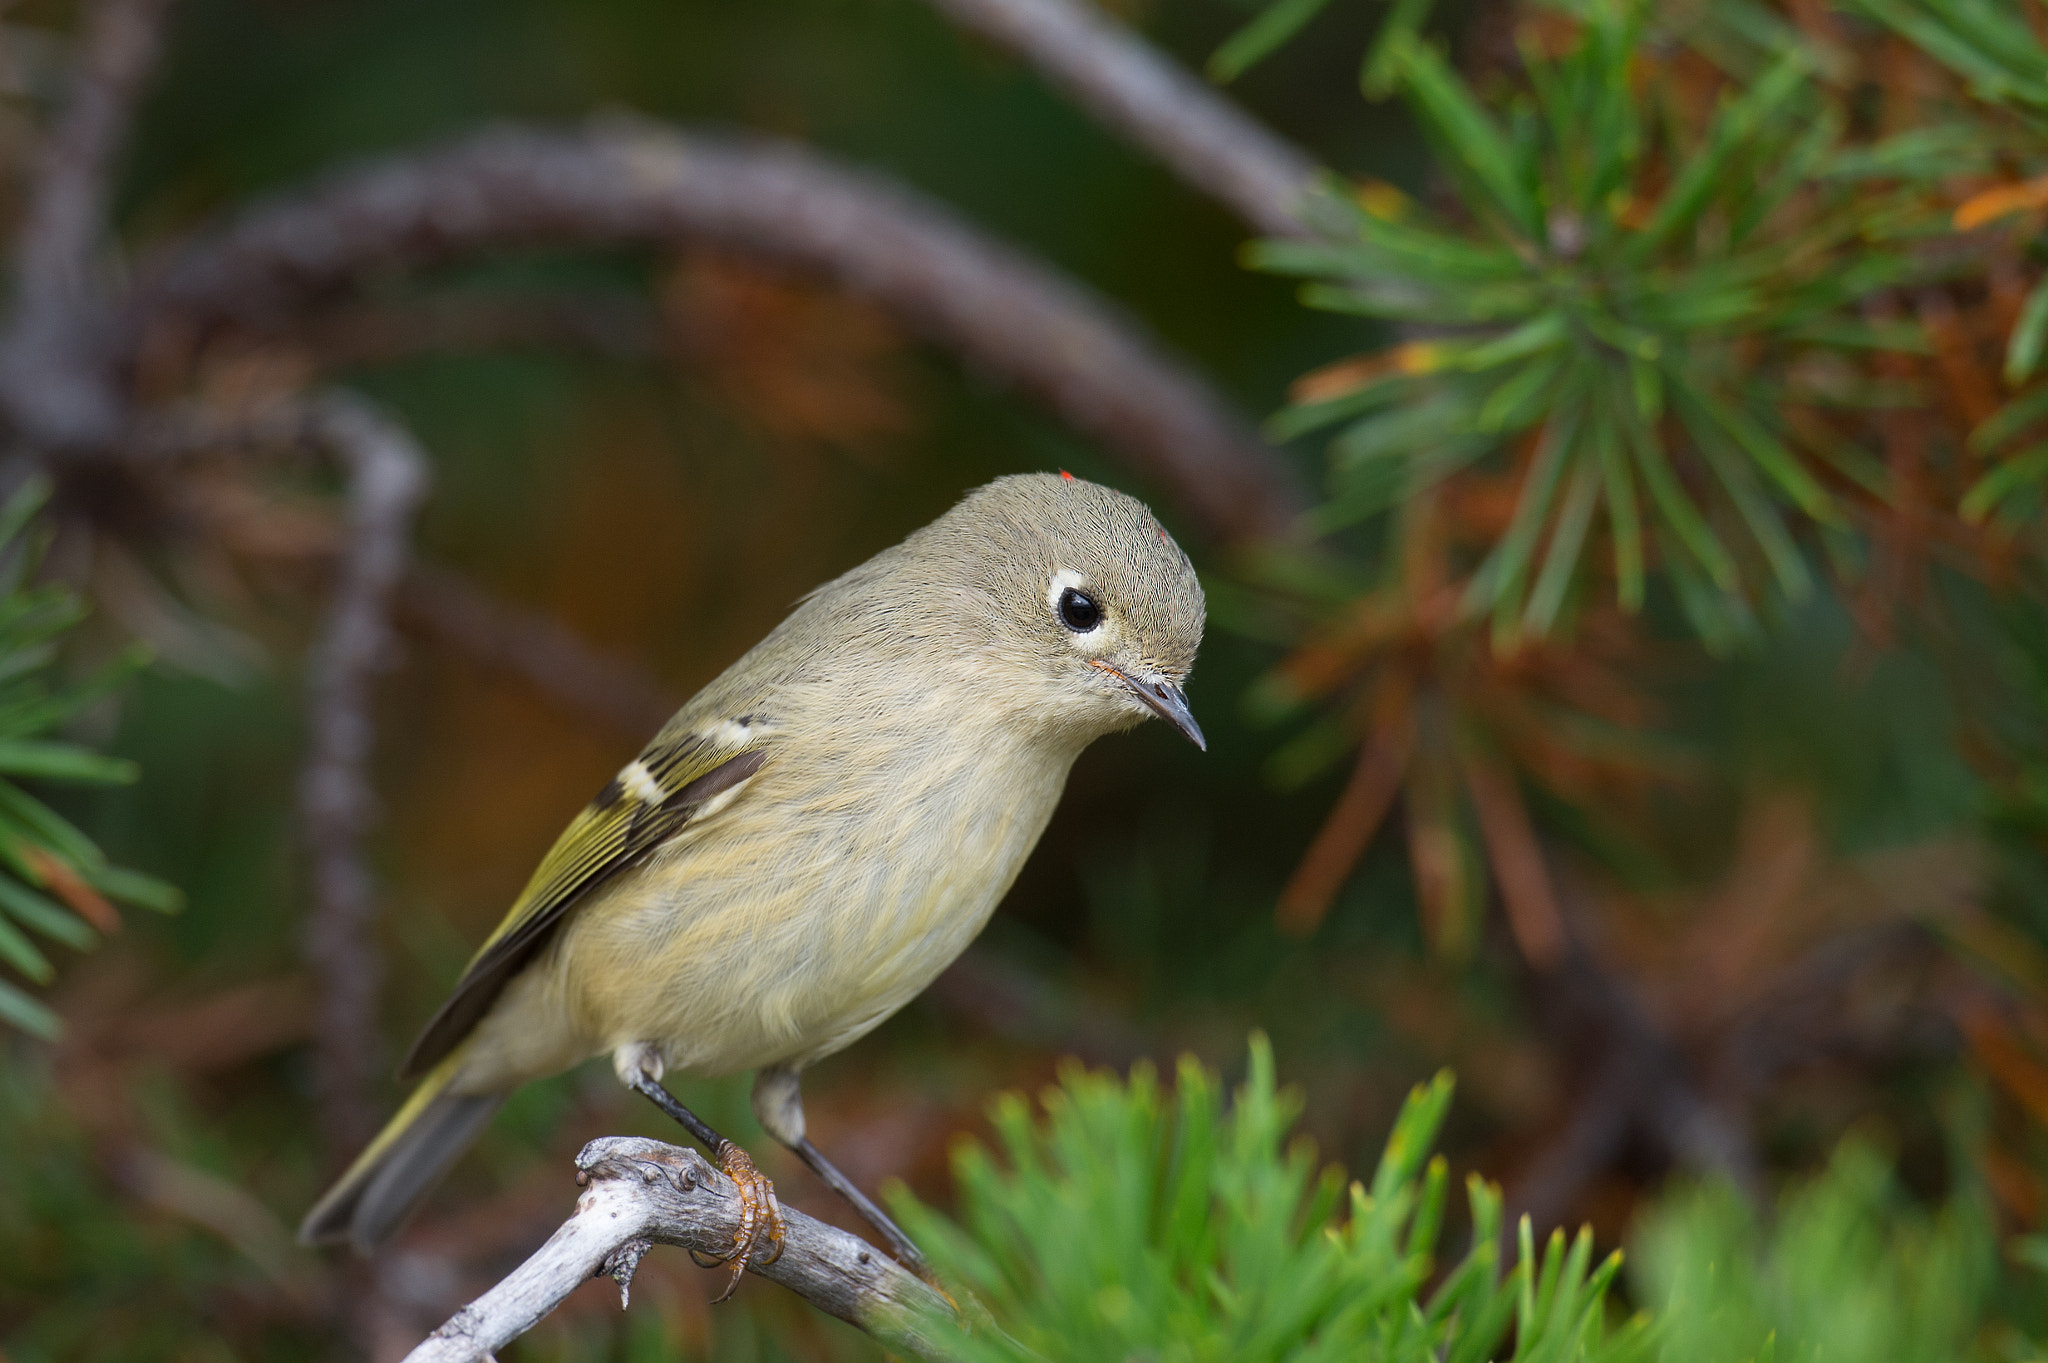 Nikon D4 sample photo. Roitelet a couronne rubis,  ruby-crowned kinglet. photography